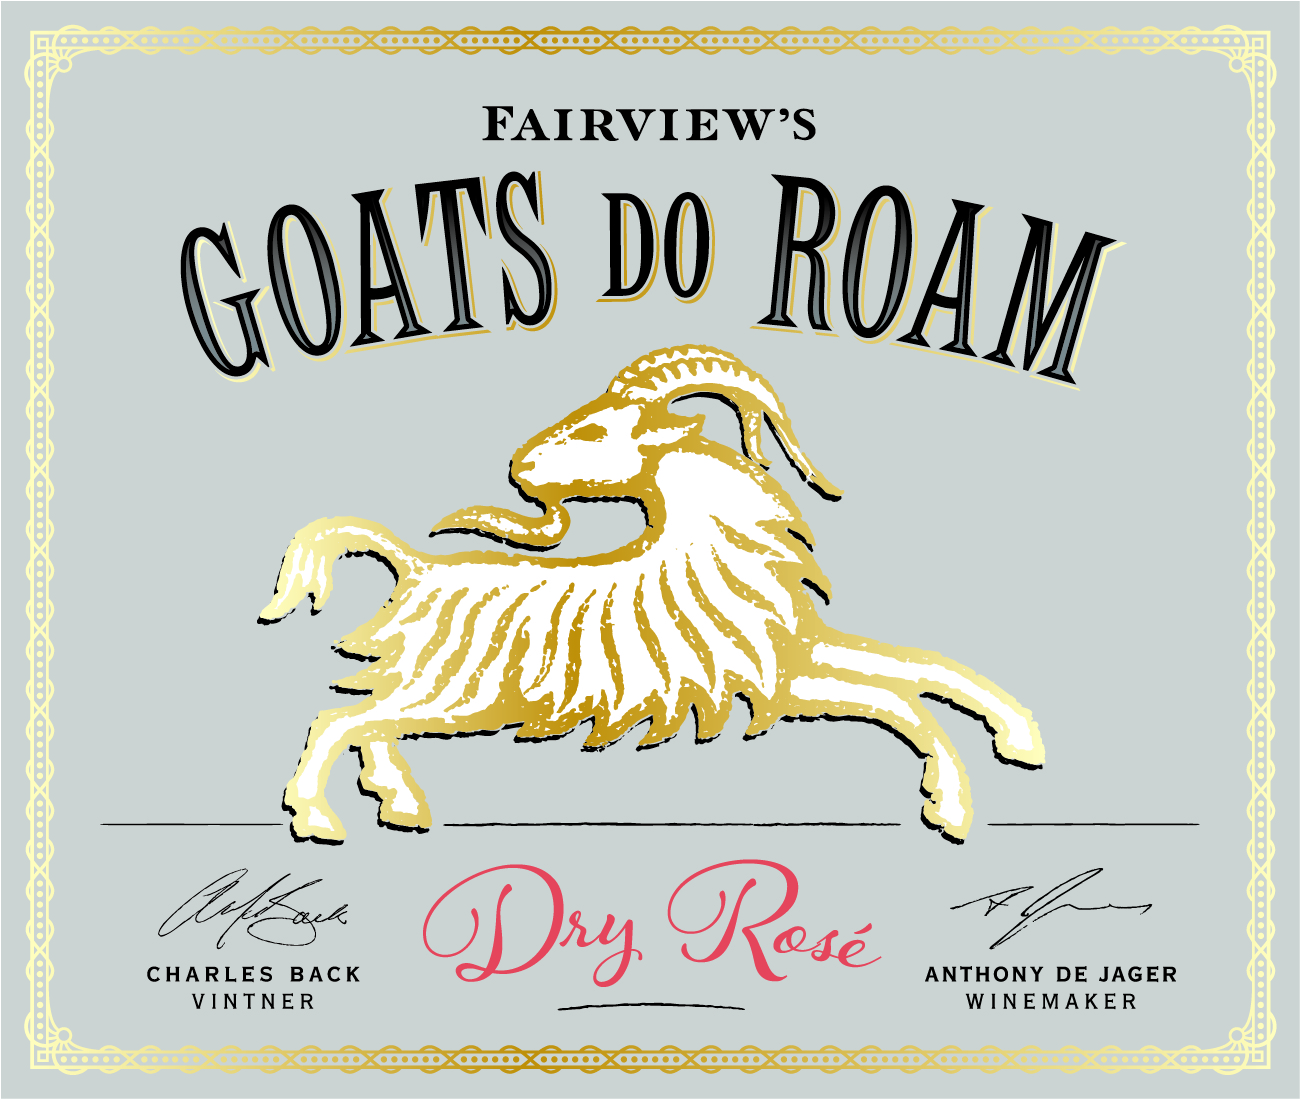 Goats do Roam Festive Case Try our brand new 3 bottle box with our newly-labelled Goats do Roam inside. A perfect gift! R150 a box Click here to buy. - Charles Back 